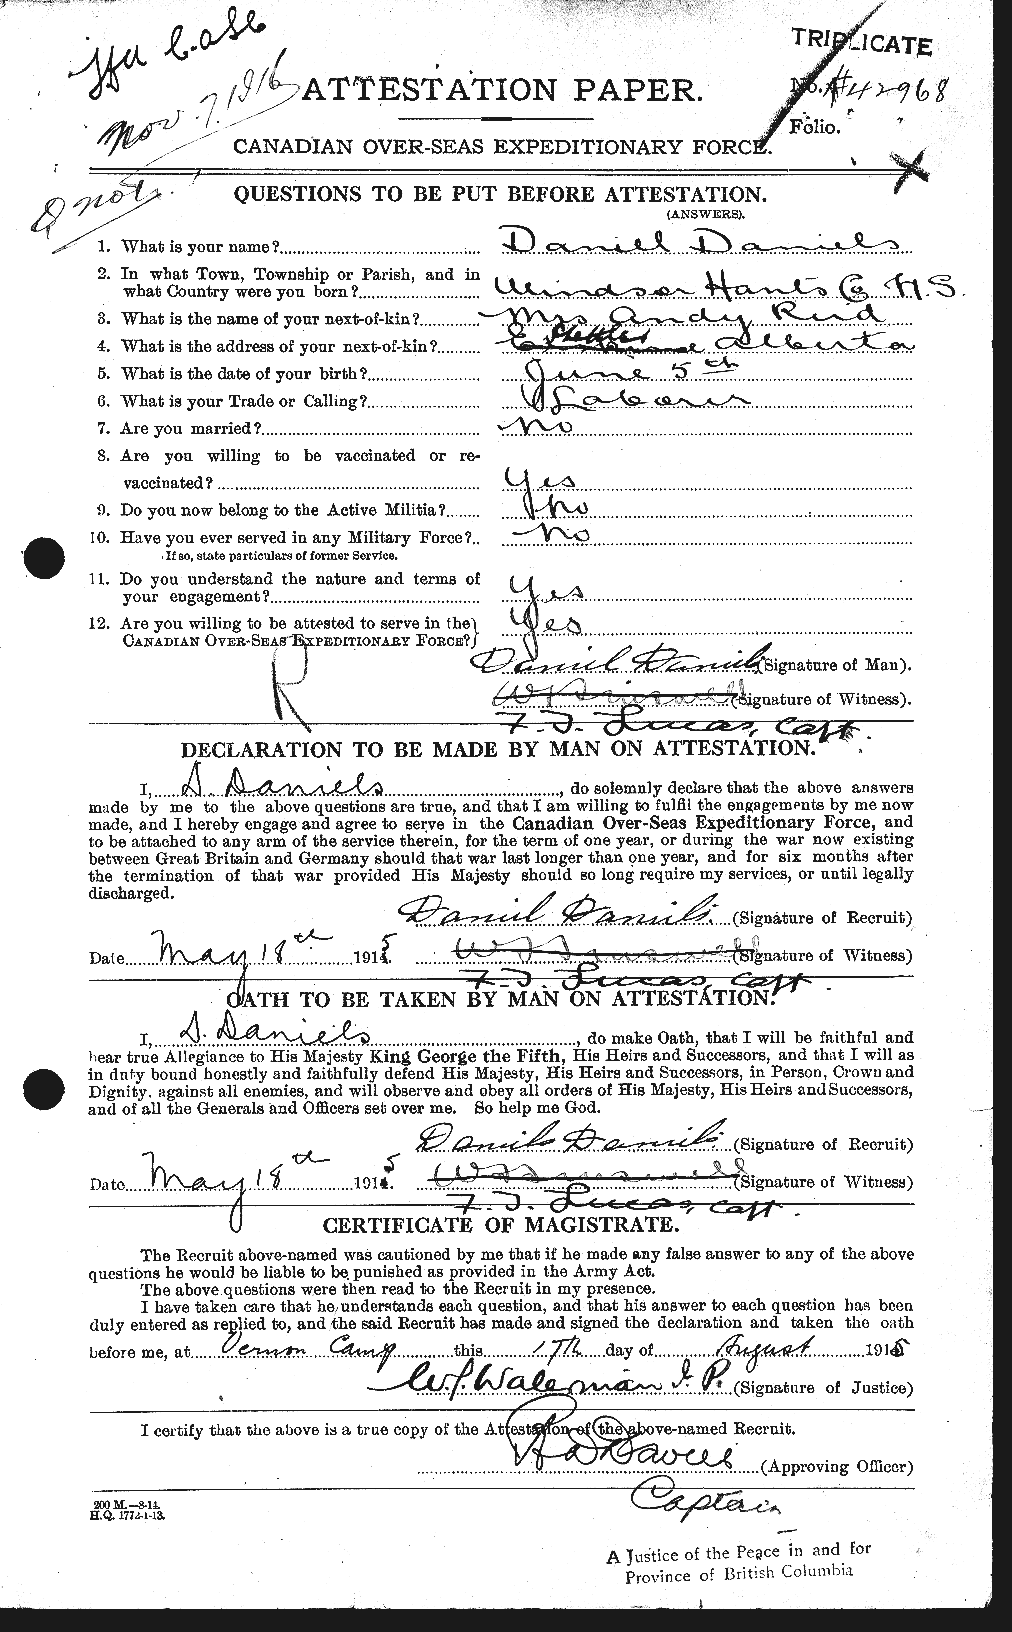 Personnel Records of the First World War - CEF 279576a